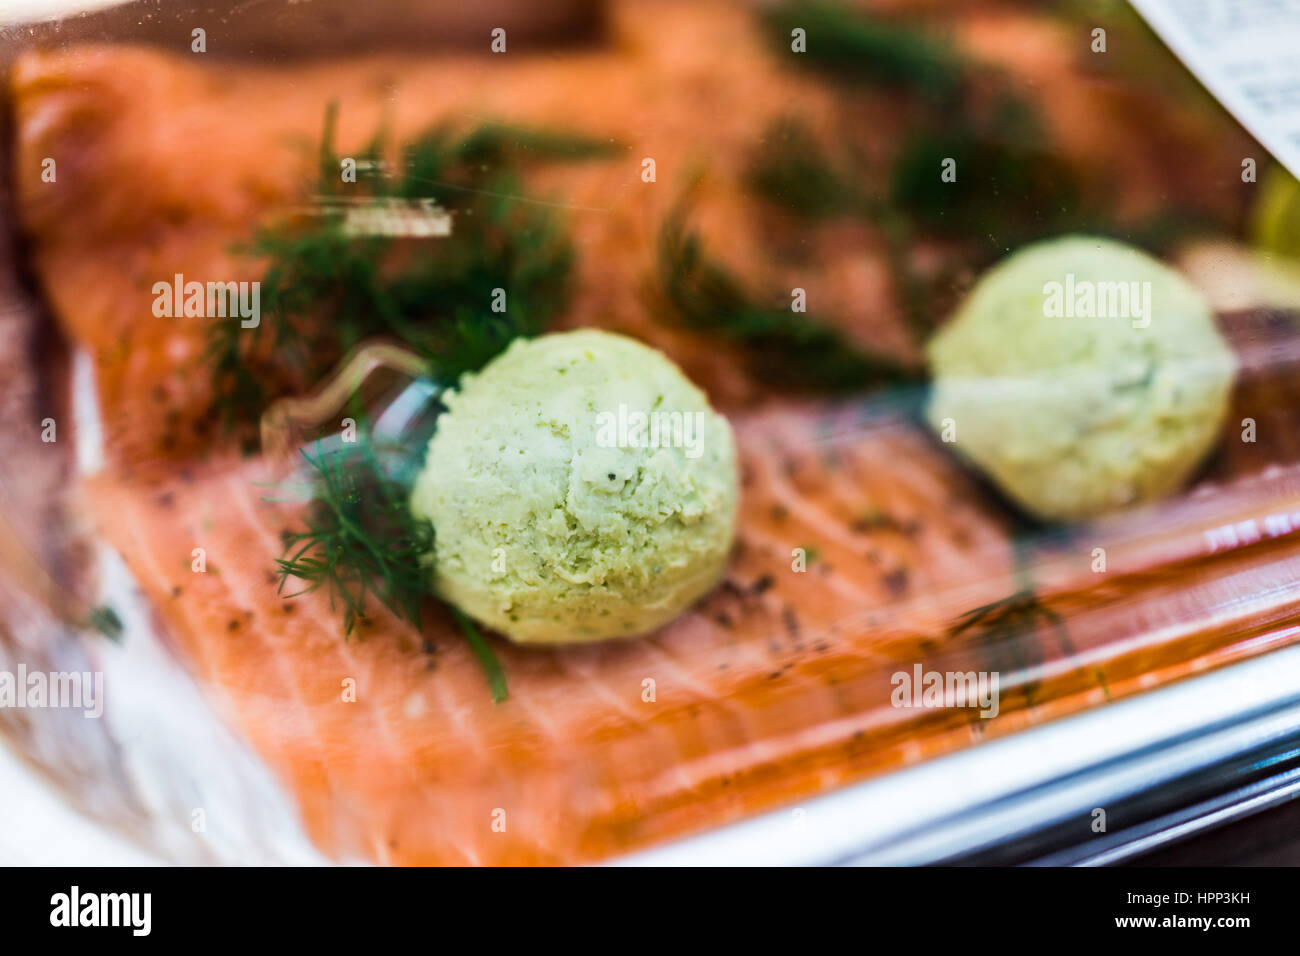 Raw salmon filets with pesto butter in packaged plastic container Stock Photo